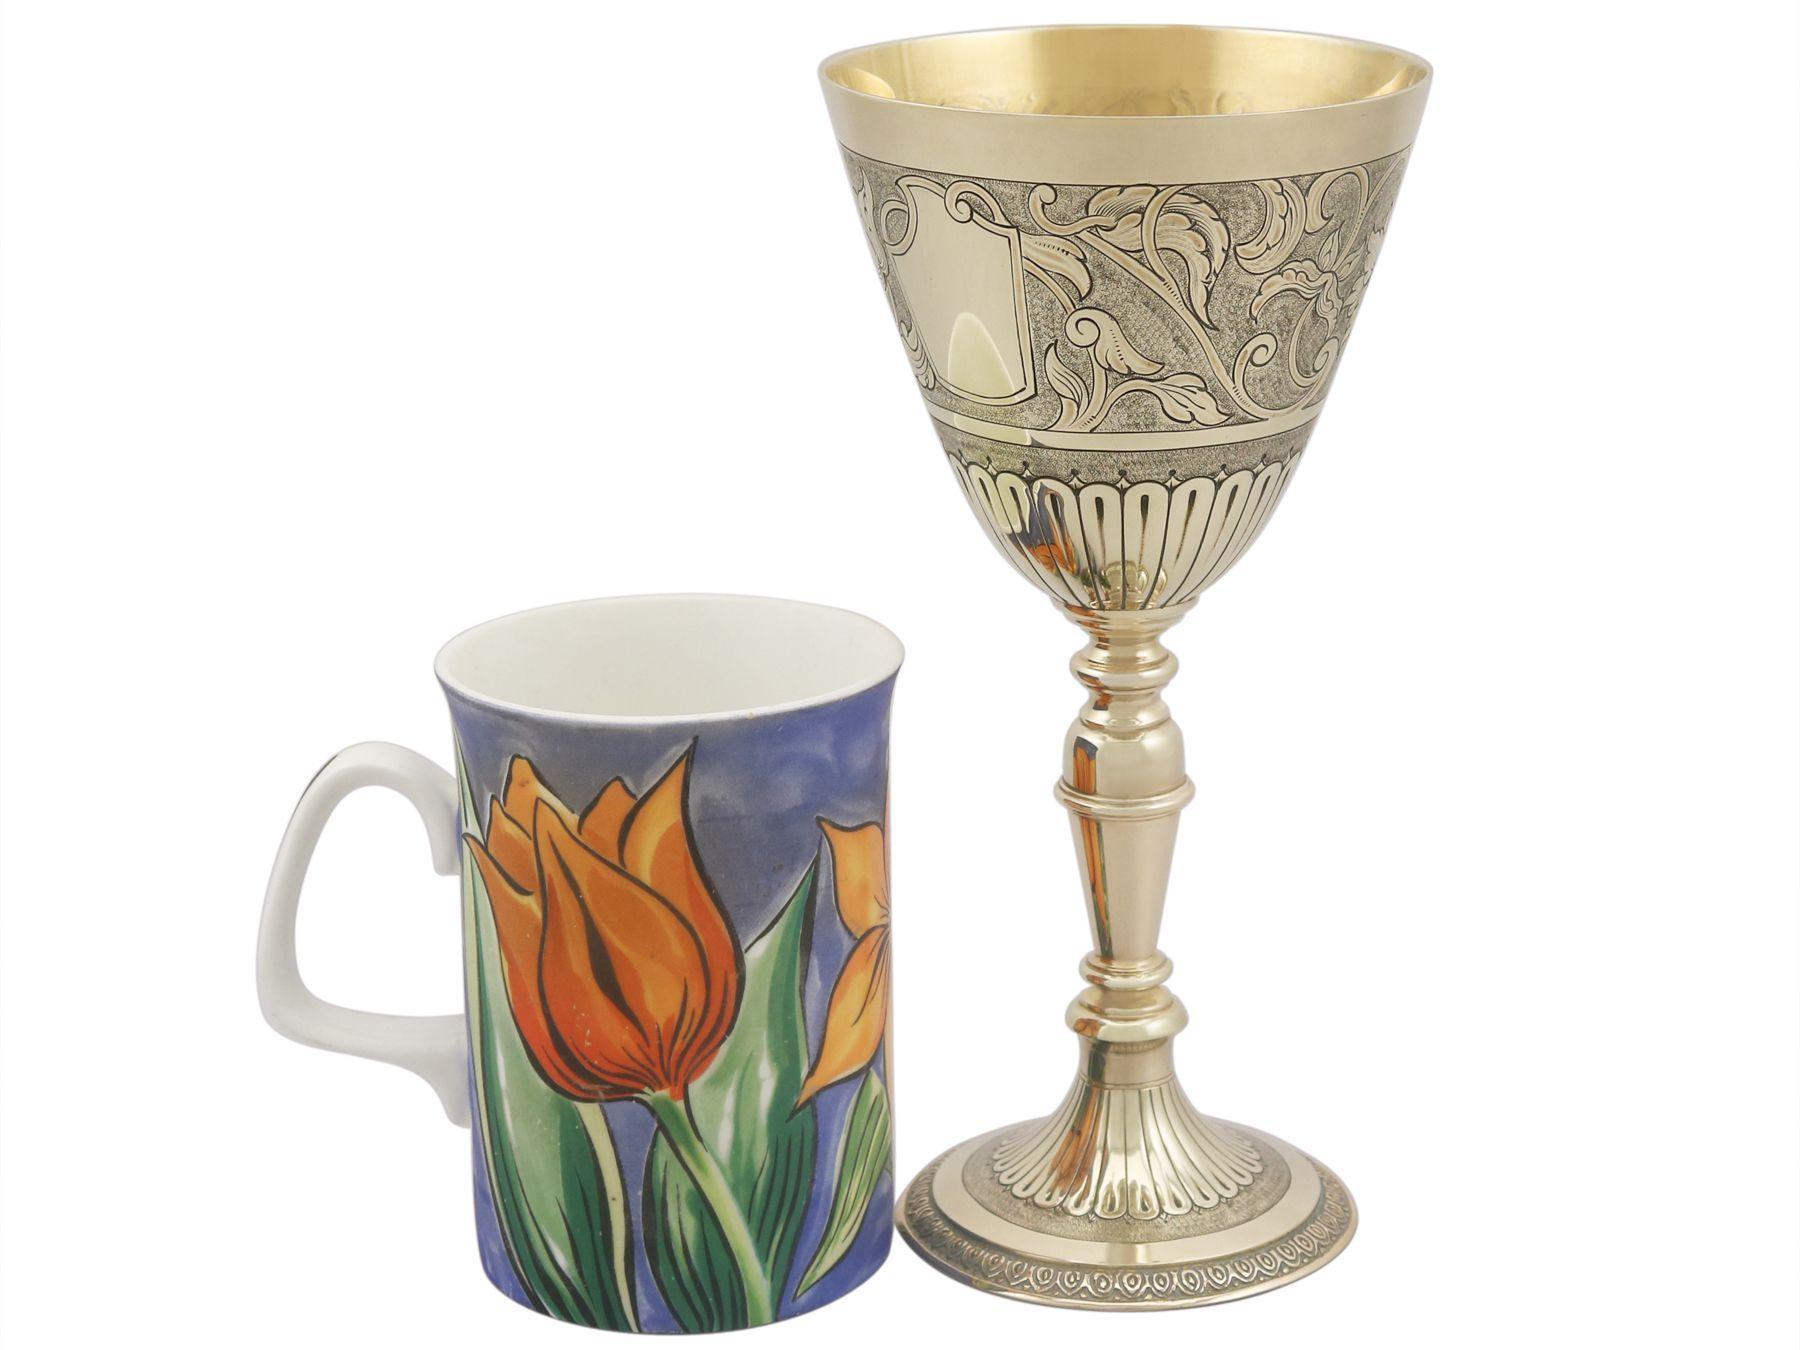 An exceptional, fine and impressive vintage Elizabeth II English 9 karat yellow gold presentation cup and plinth; an addition to our diverse presentation silverware collection

This exceptional vintage yellow gold presentation cup has been